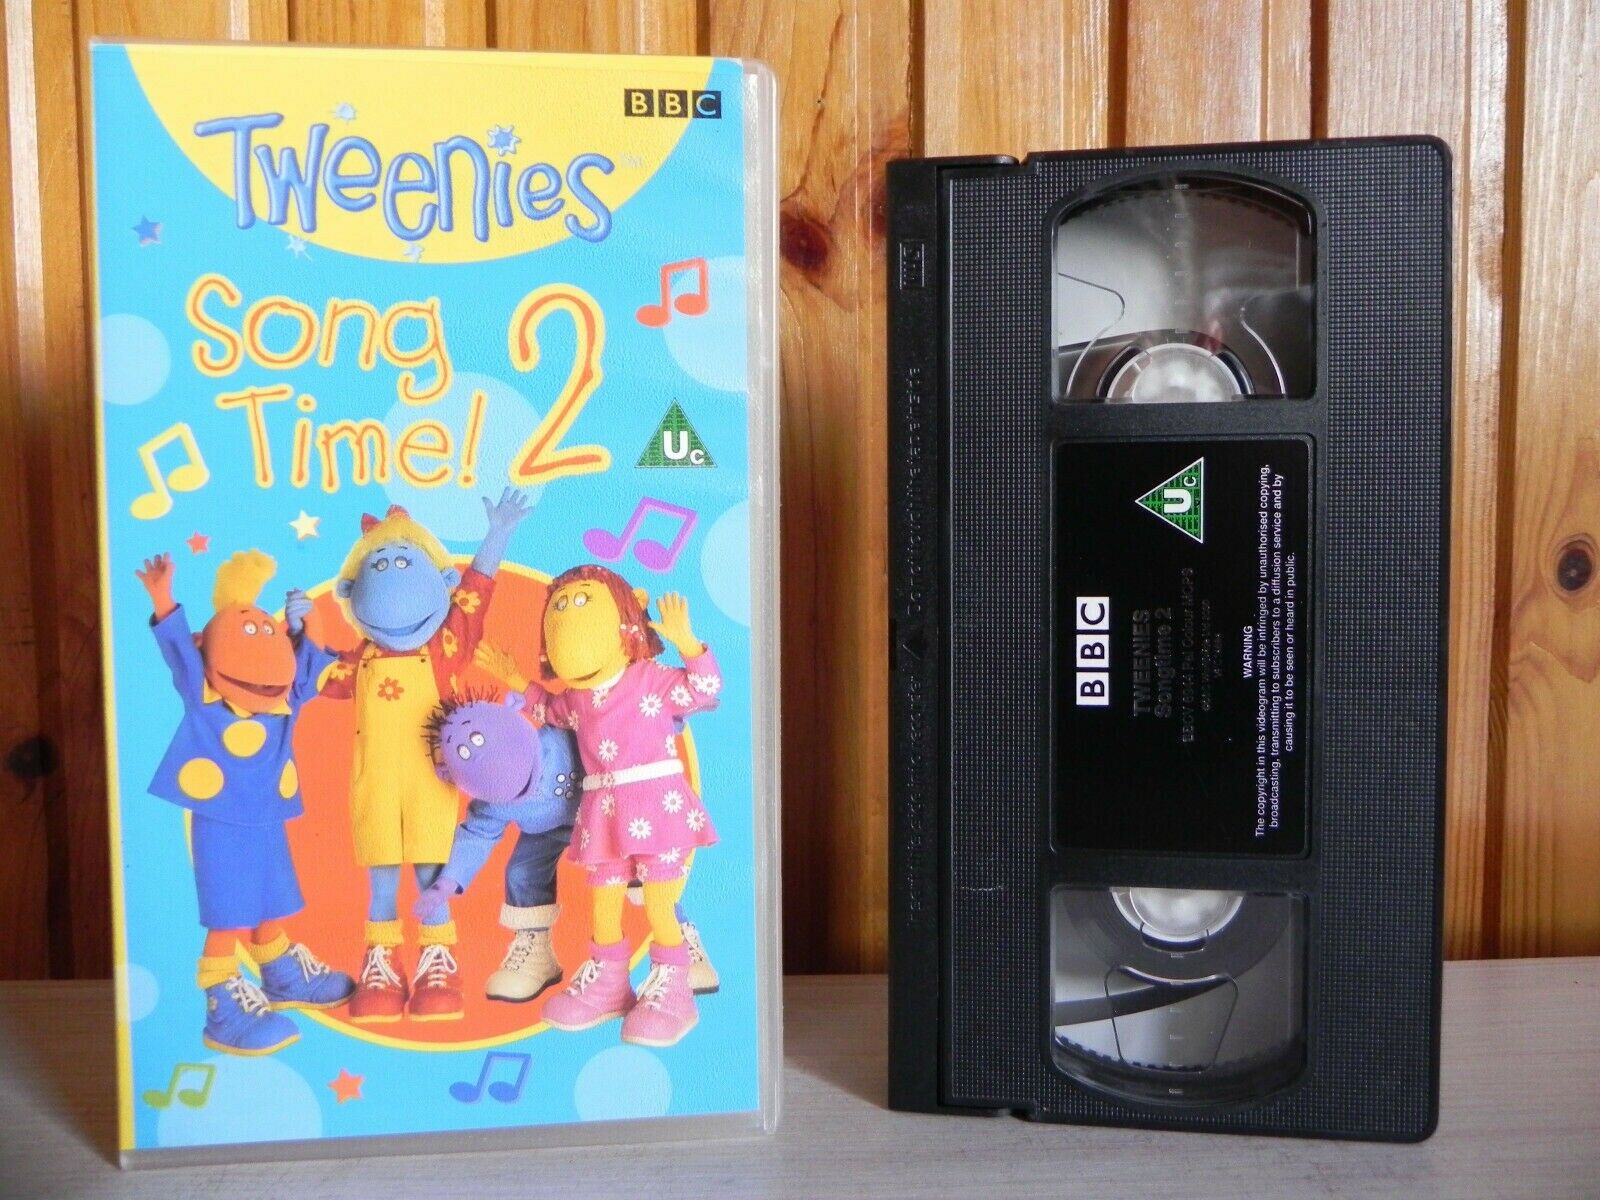 Tweenies - Song Time 2 - BBC - Runaway Train - Mousie Brown - Hot And Cold - VHS-